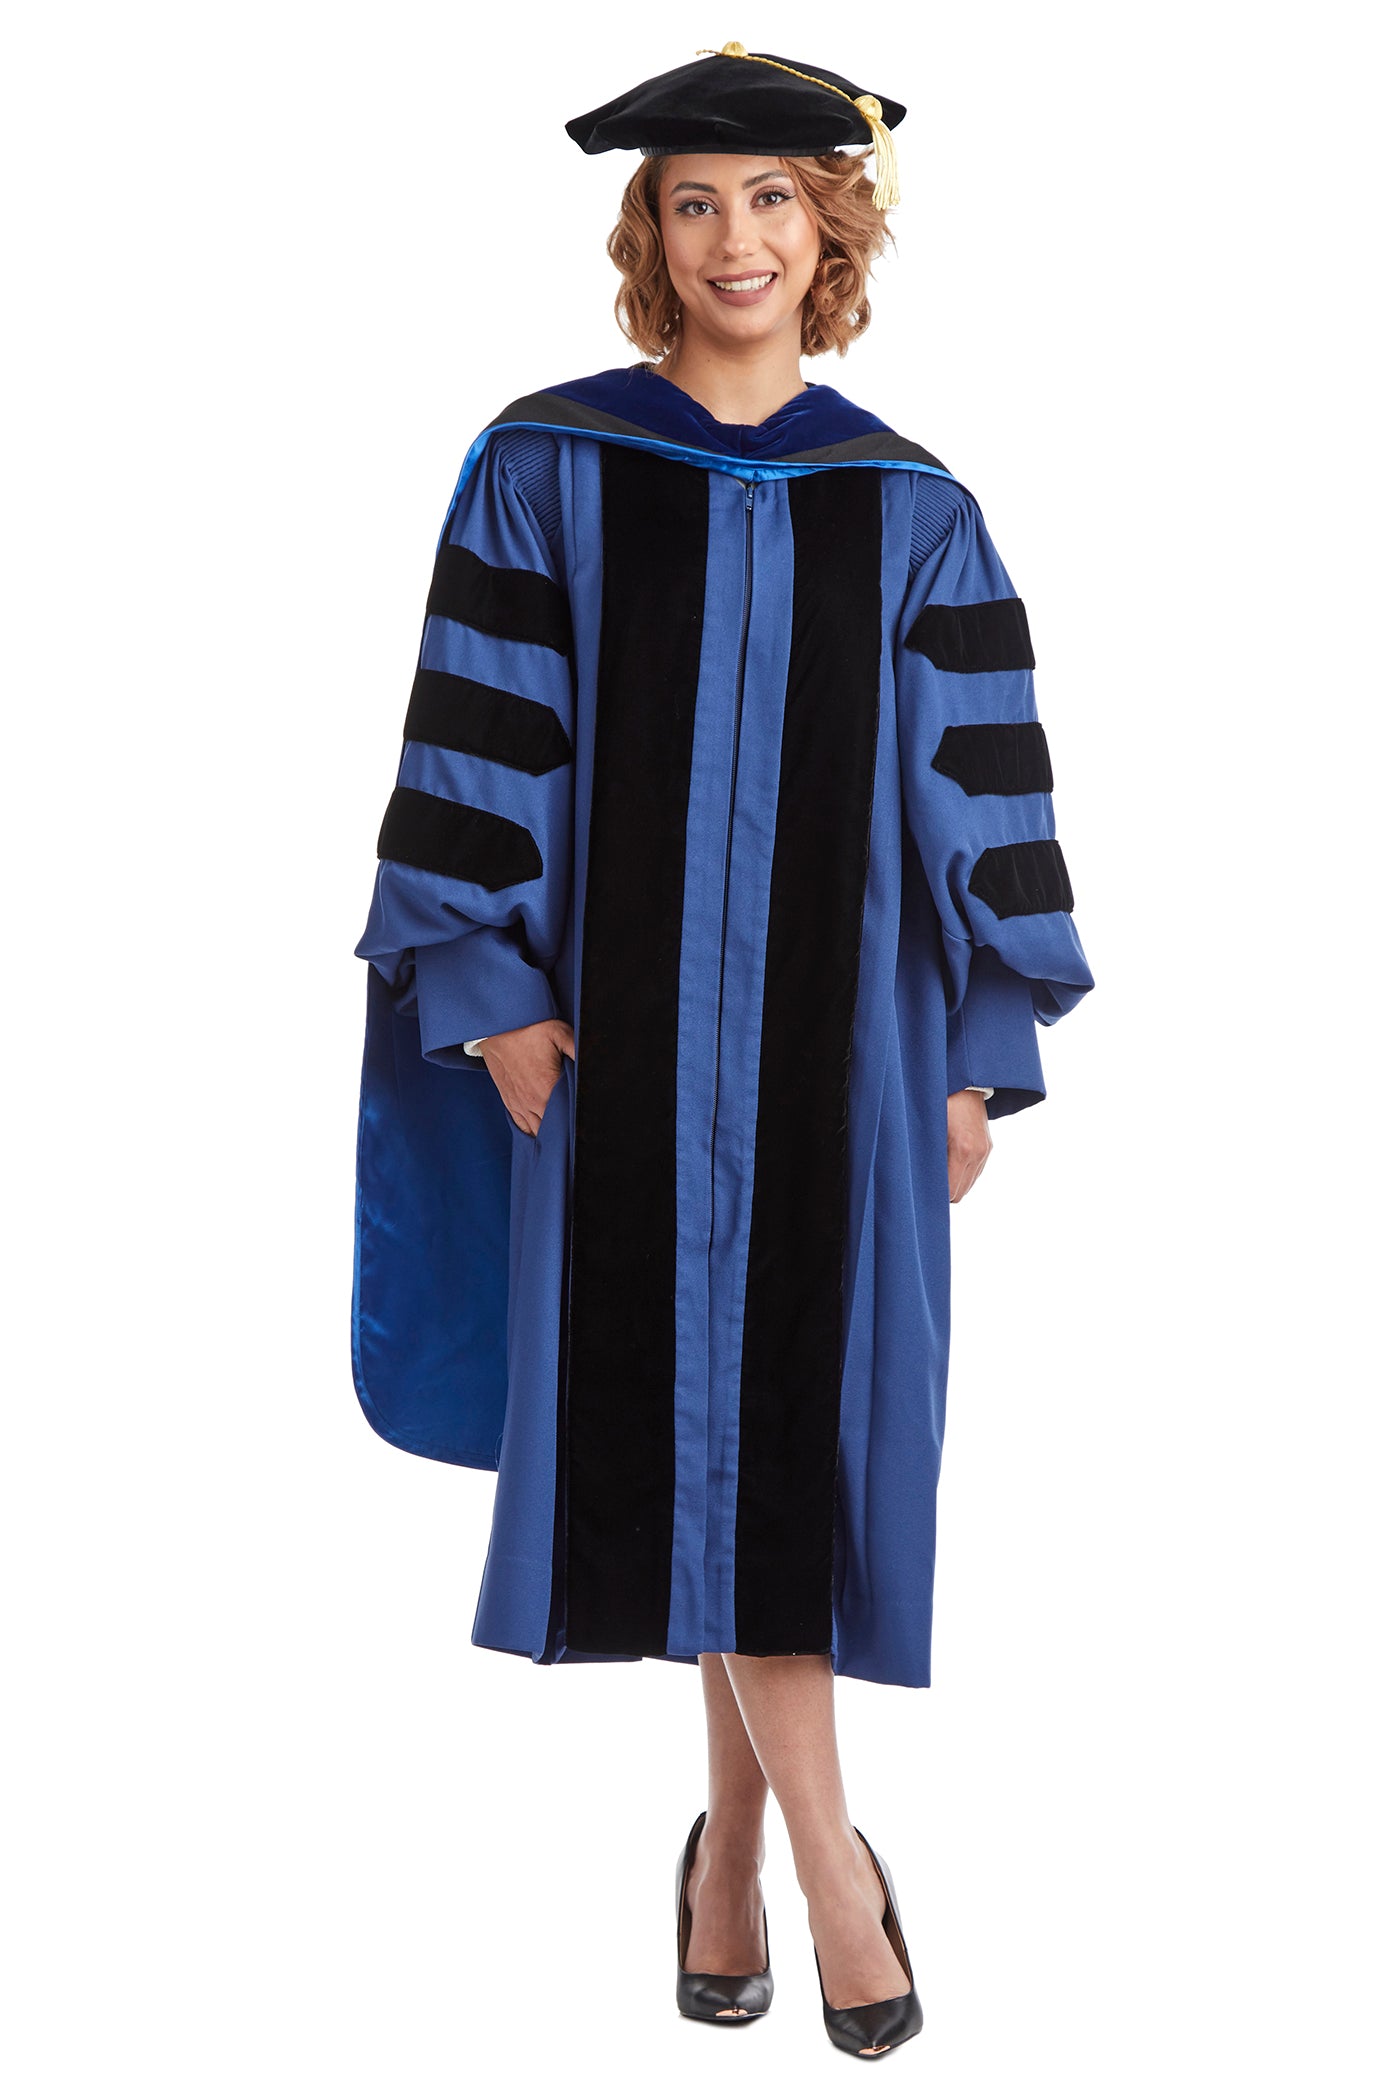 Yale Commencement Doctoral Regalia - Gowns, Hoods, & Tams – CAPGOWN